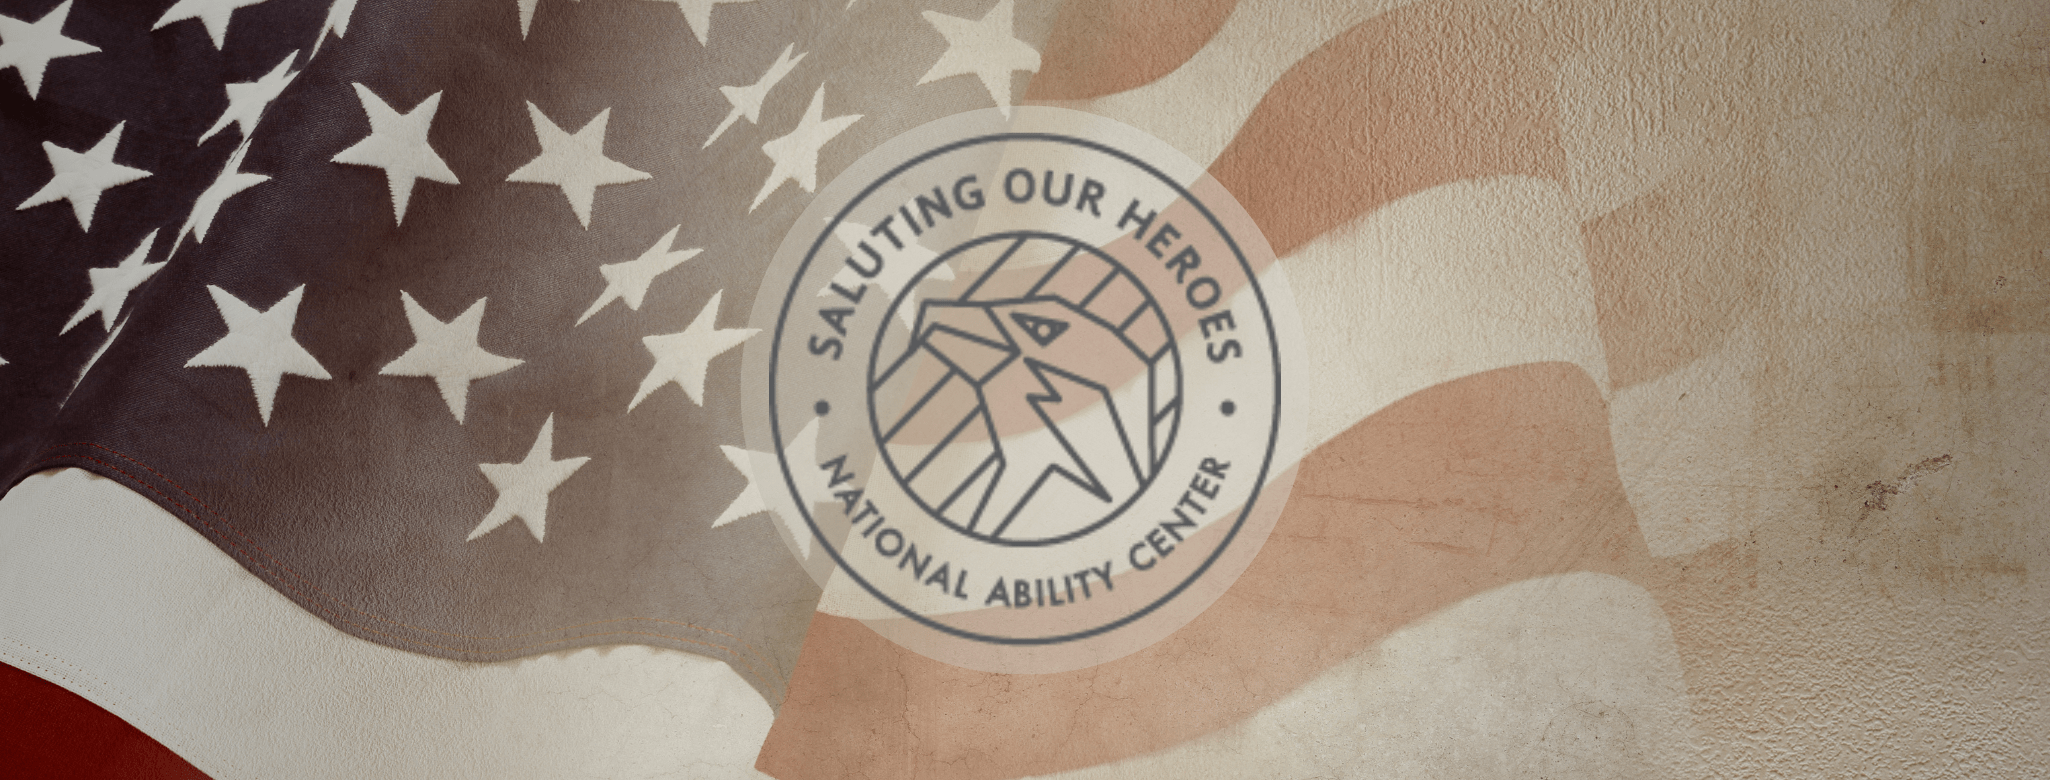 leading-adaptive-recreation-organization-to-honor-military-service-members-and-veterans-with-saluting-our-heroes-luncheon-and-annual-field-of-flags-event-for-veterans-day